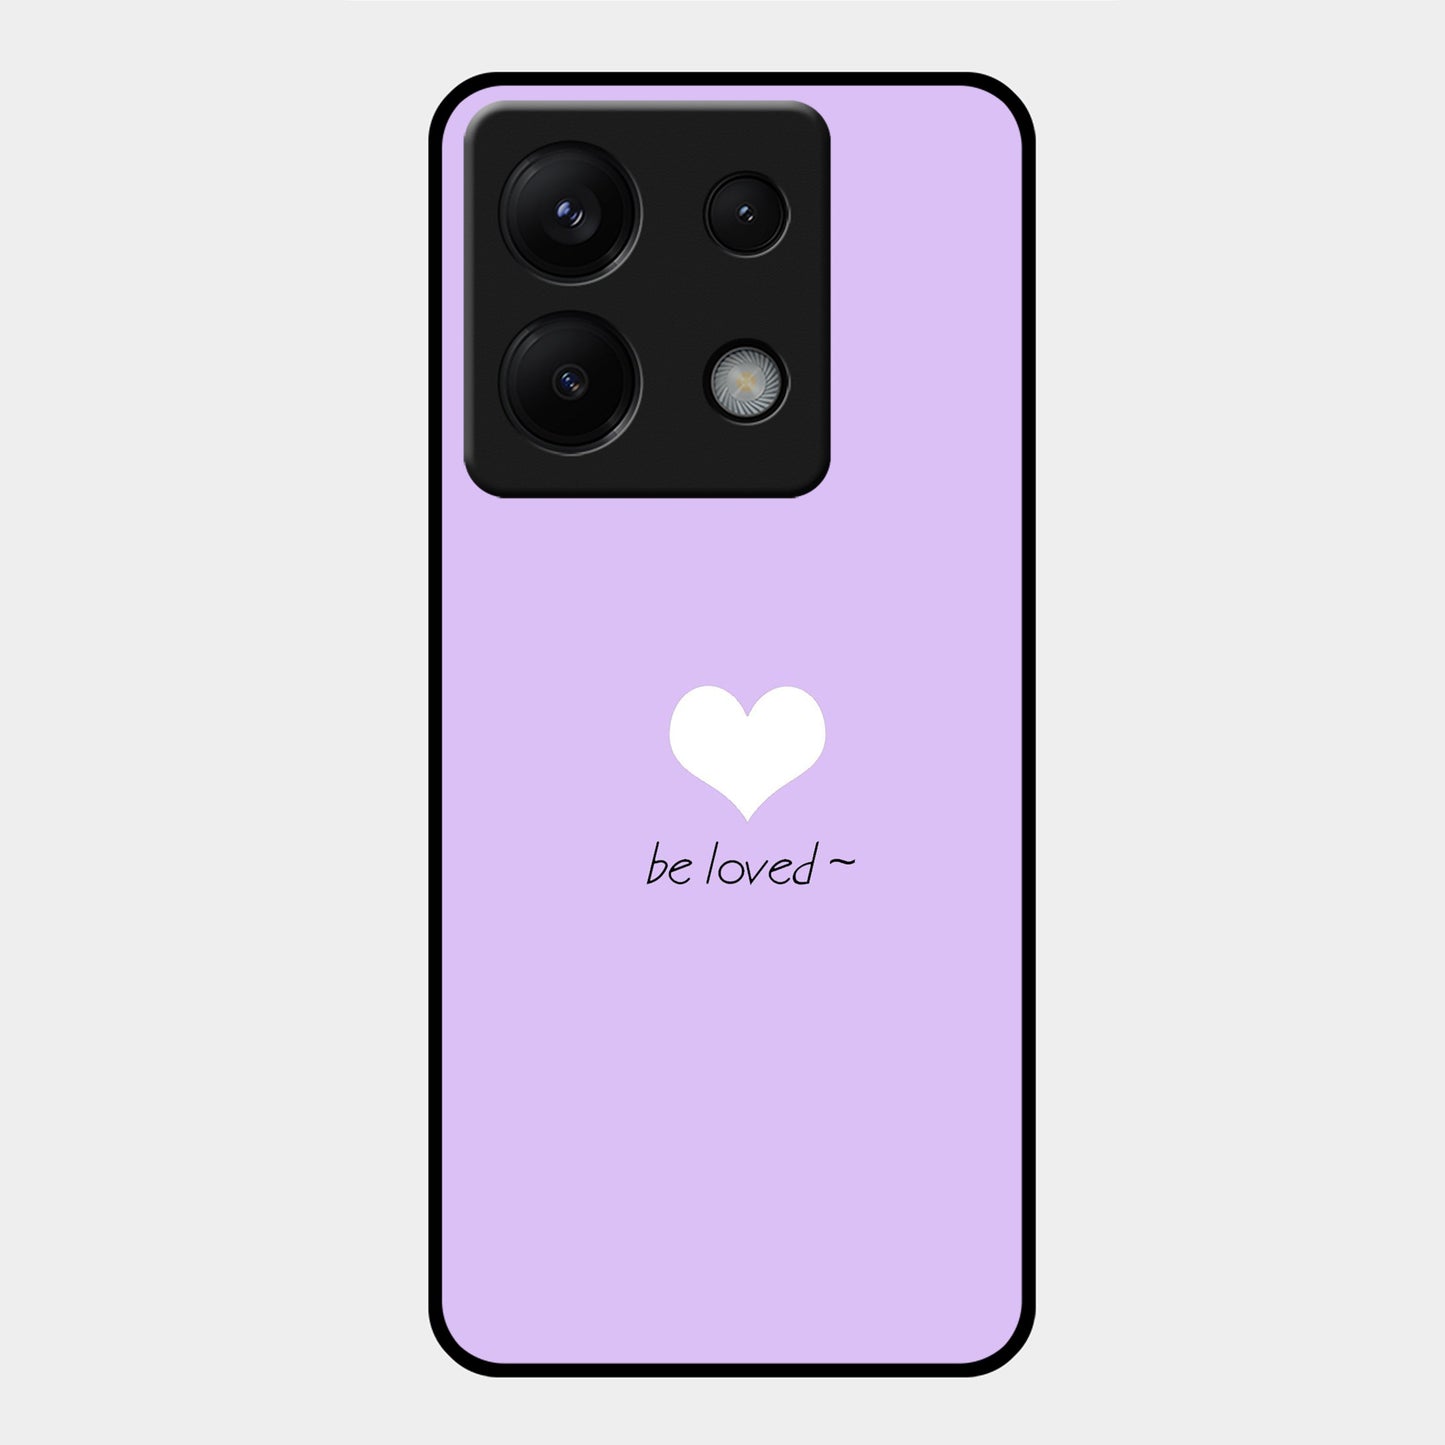 Be loved  Glossy Metal Case Cover For Redmi